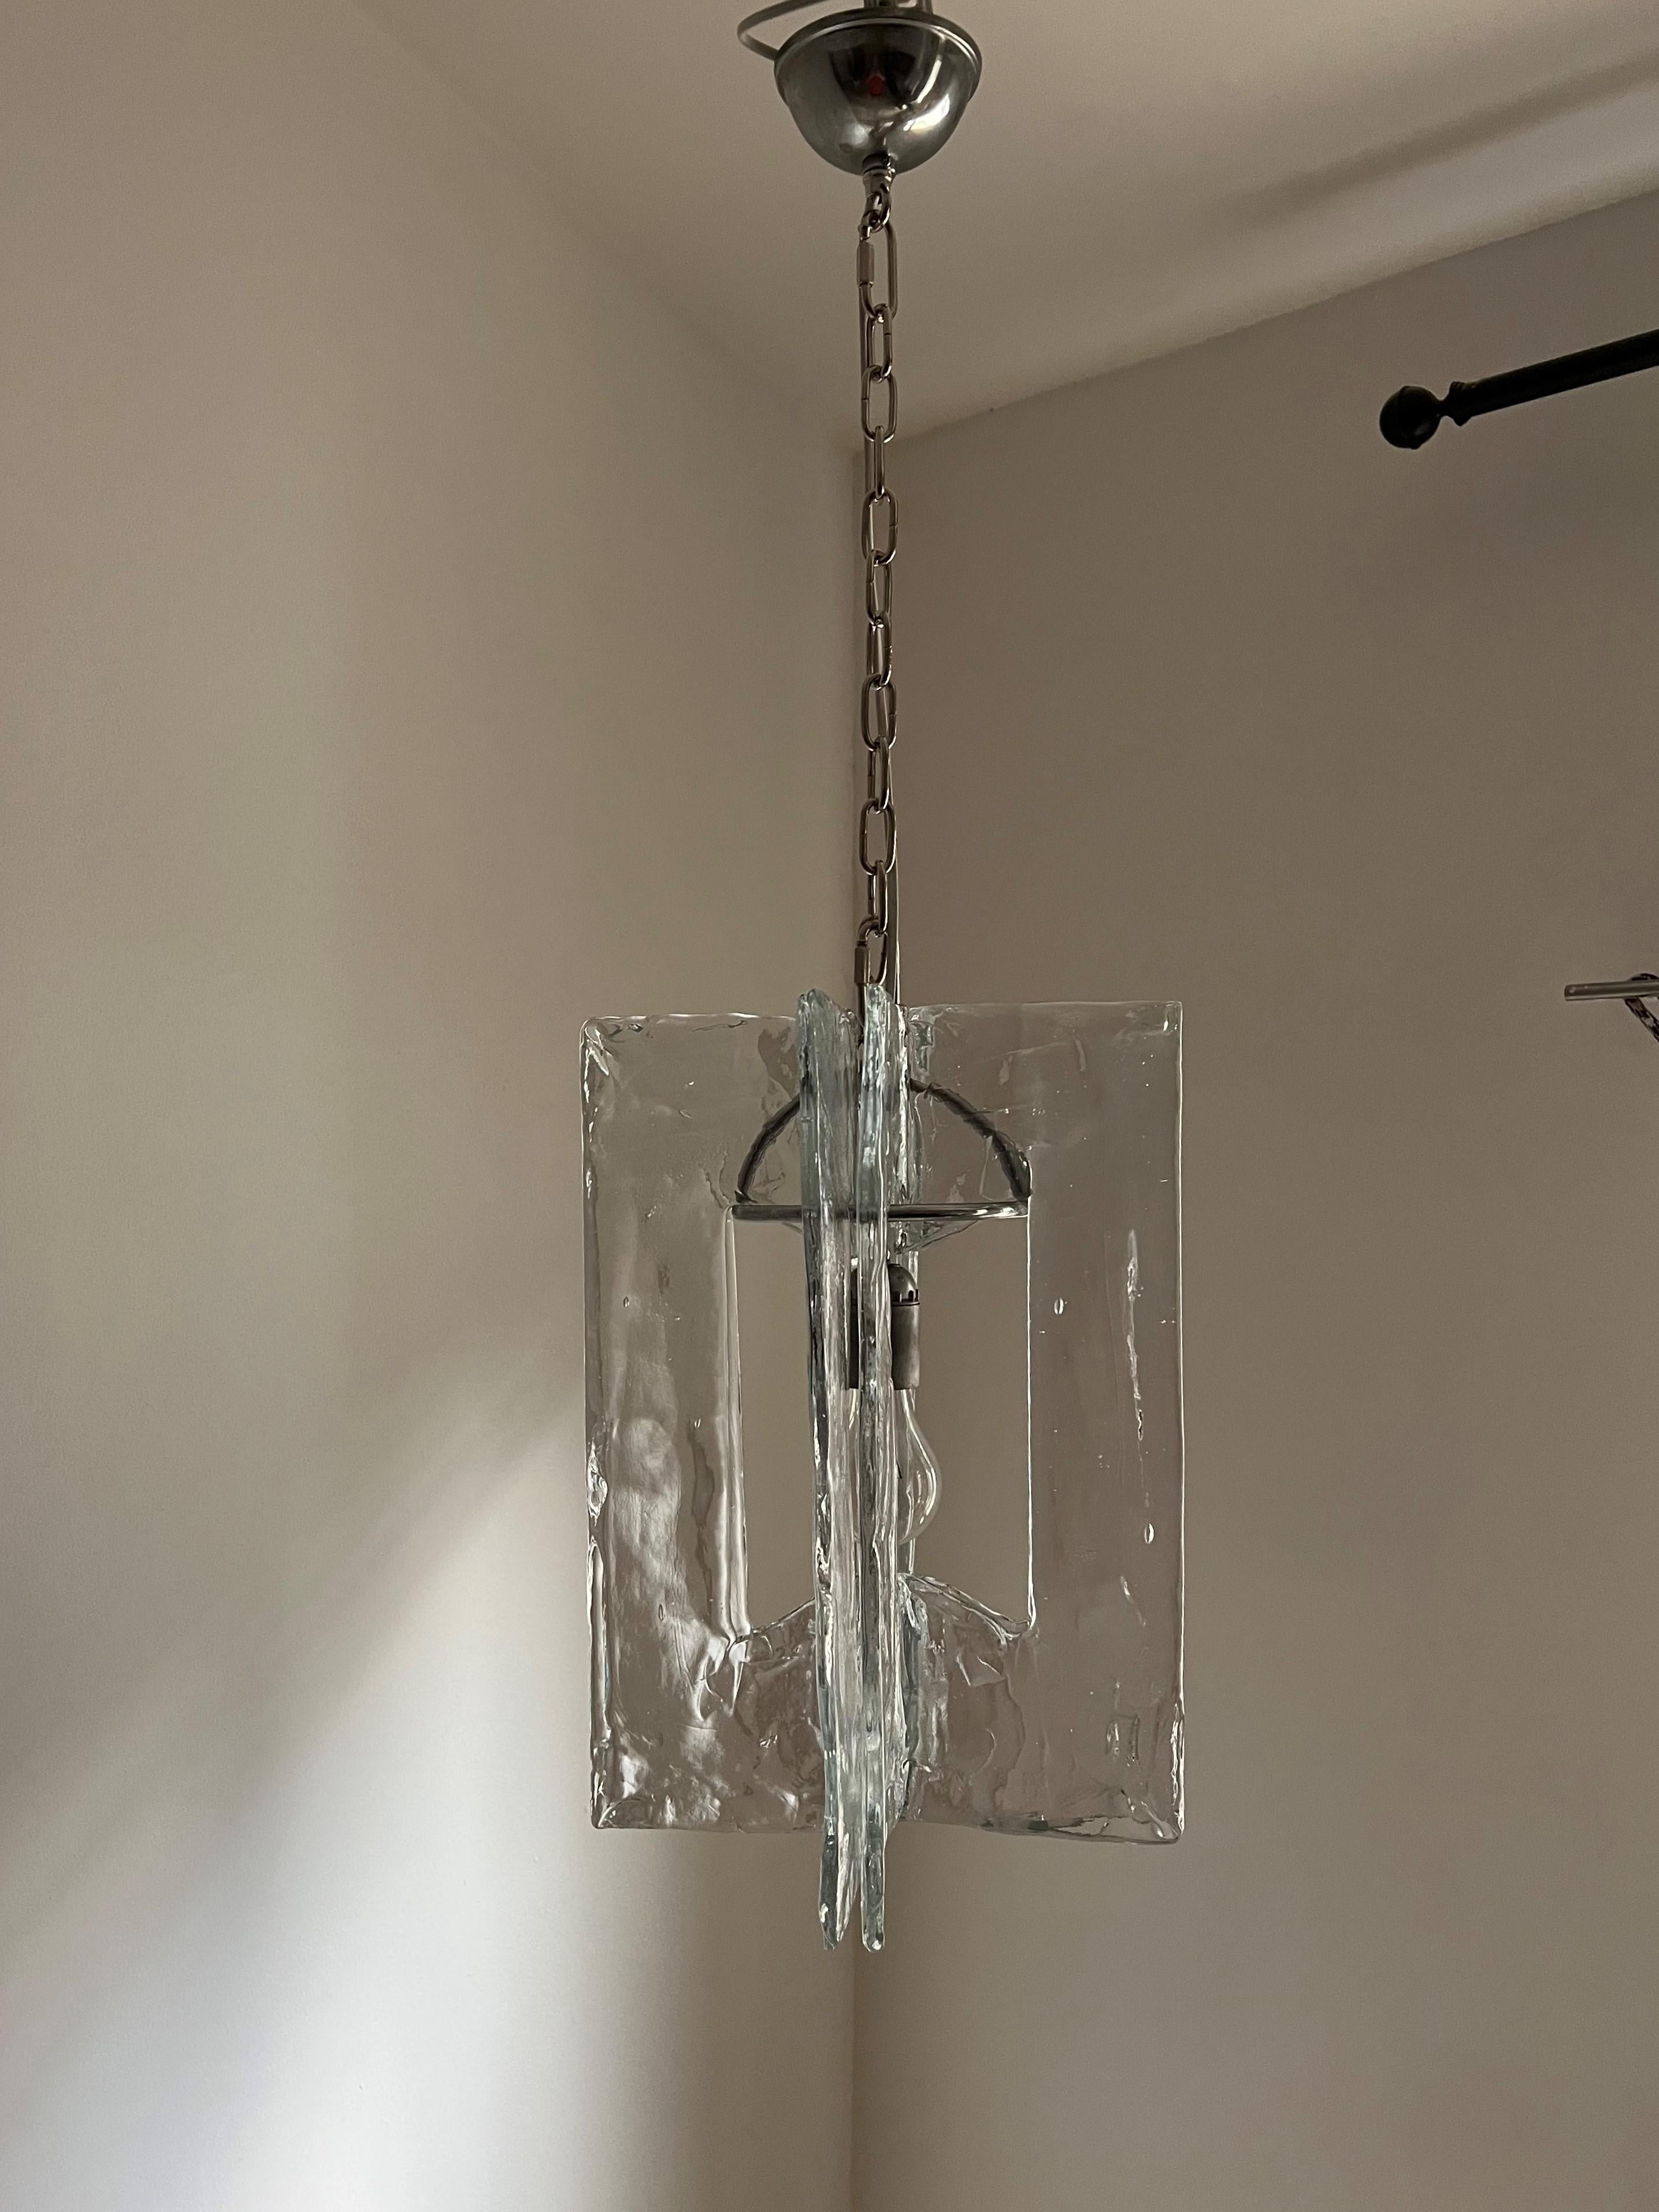 Mid-Century Modern Chandelier by Mazzega in Murano Glass, circa 1970 For Sale 2